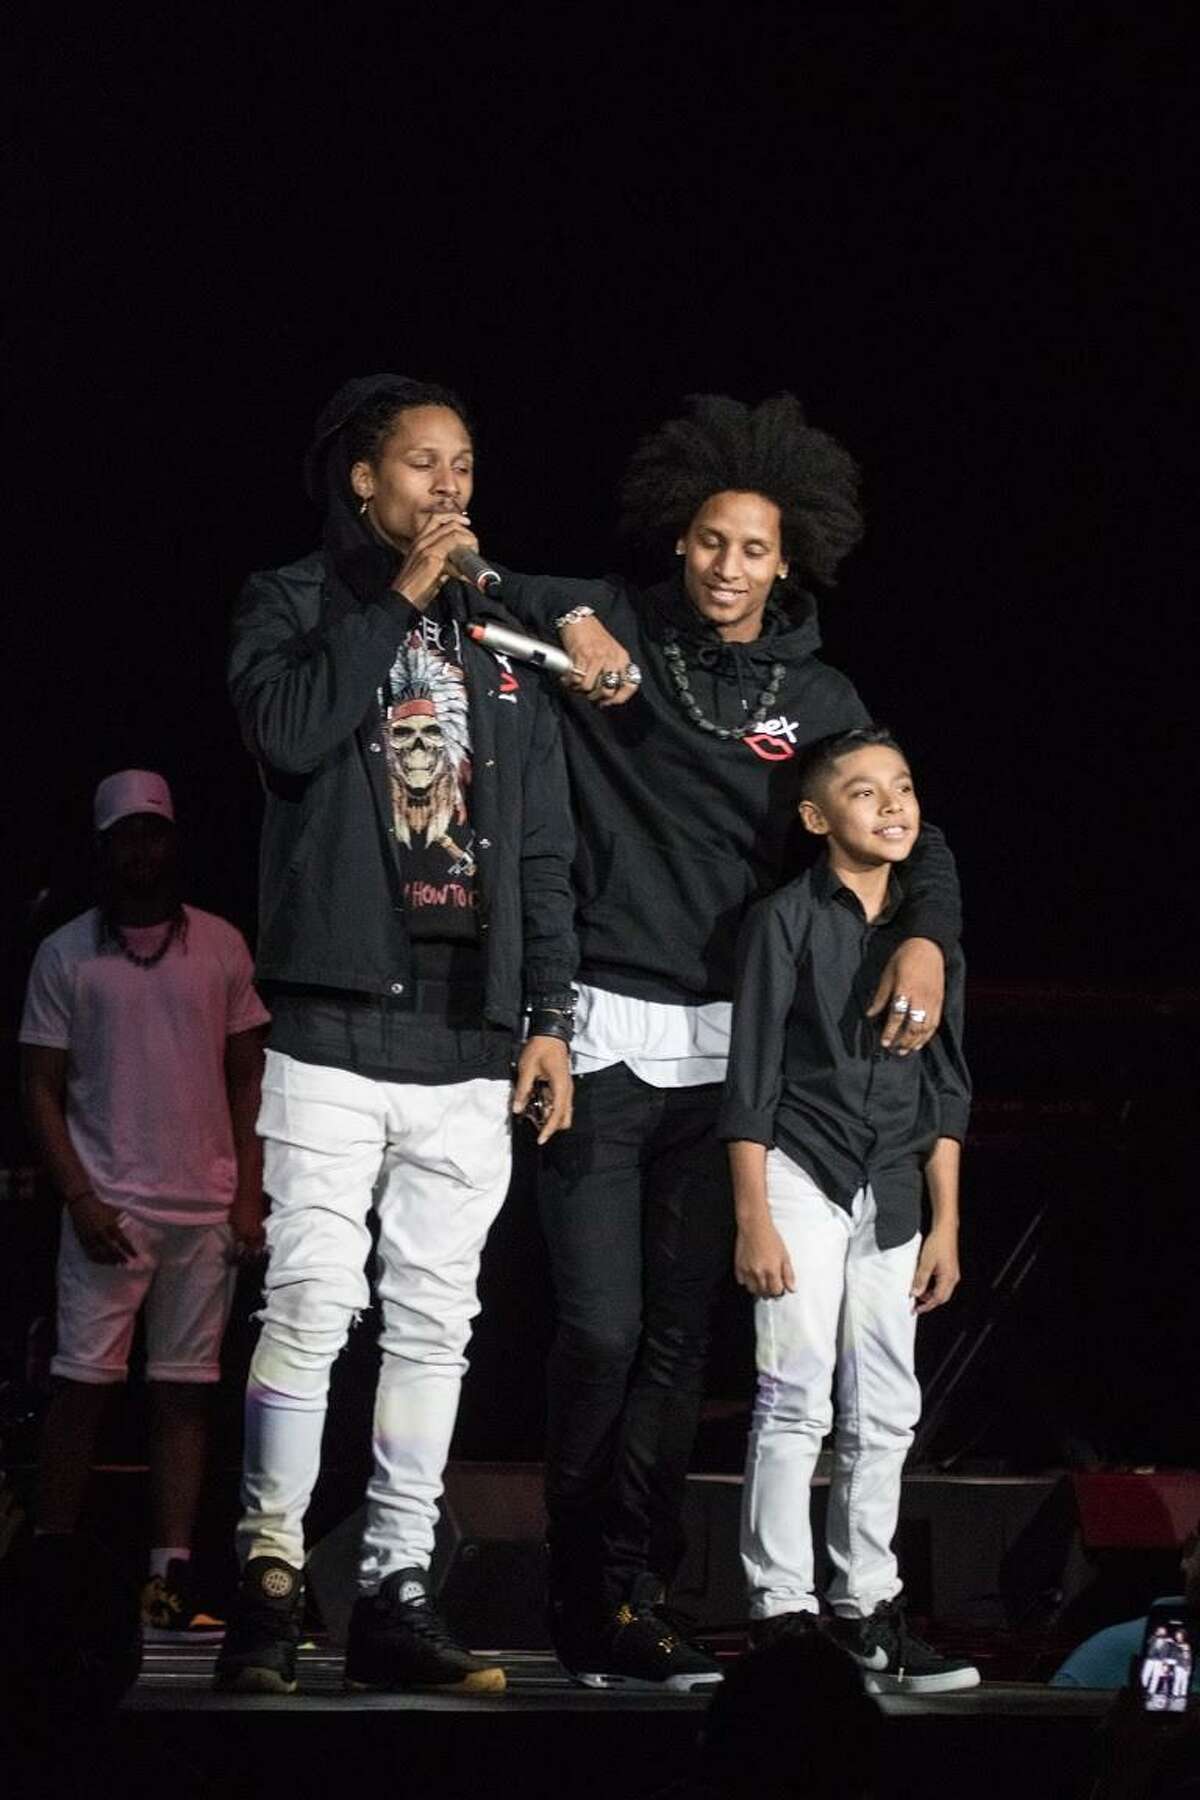 Gilbert Rodriguez shares the stage with his idols Les Twins during Summer Jam 2017 at the LEA on Tuesday.